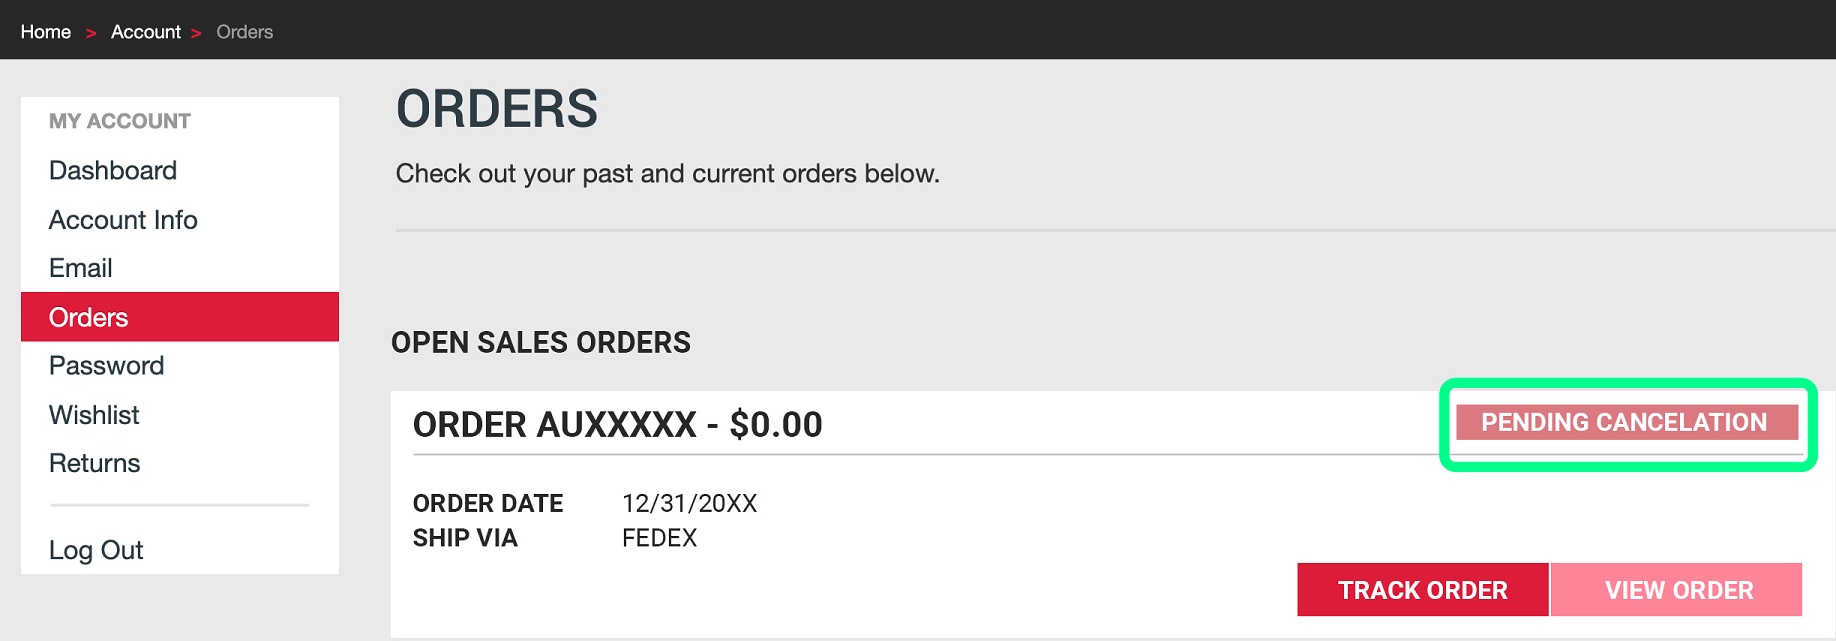 How to Cancel My Order With LMR - step 4